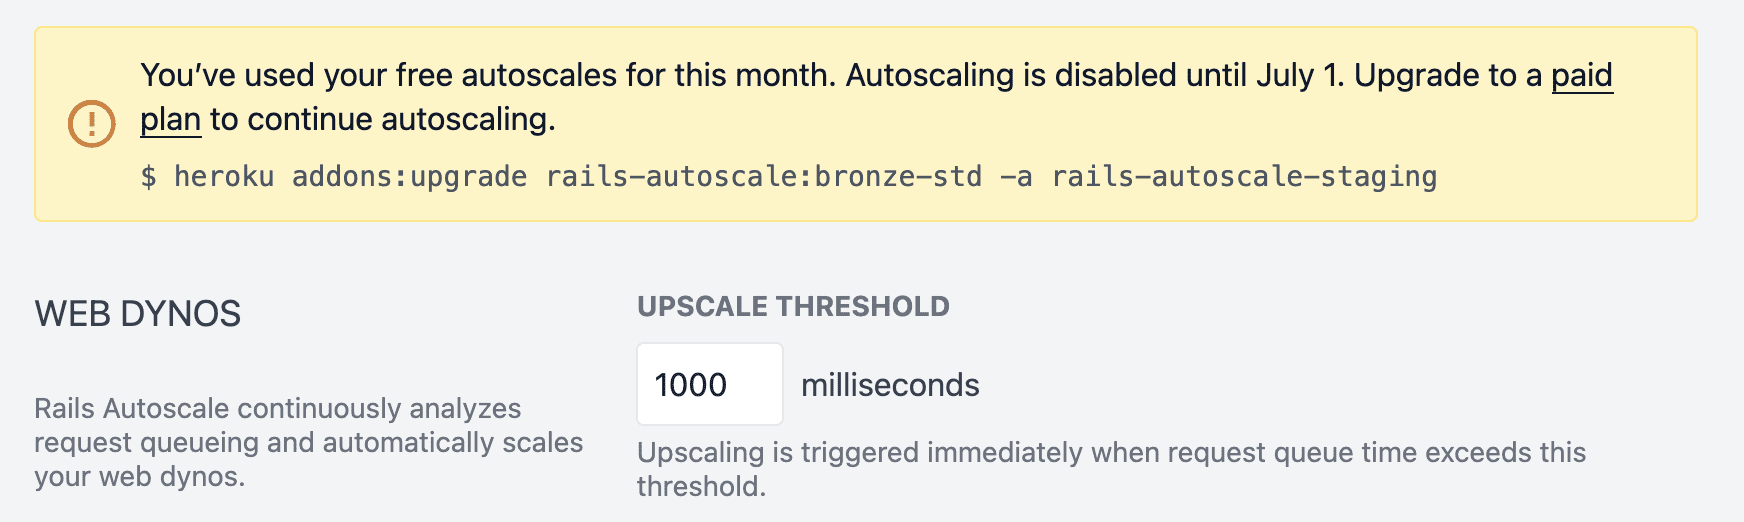 Free plan with autoscaling disabled